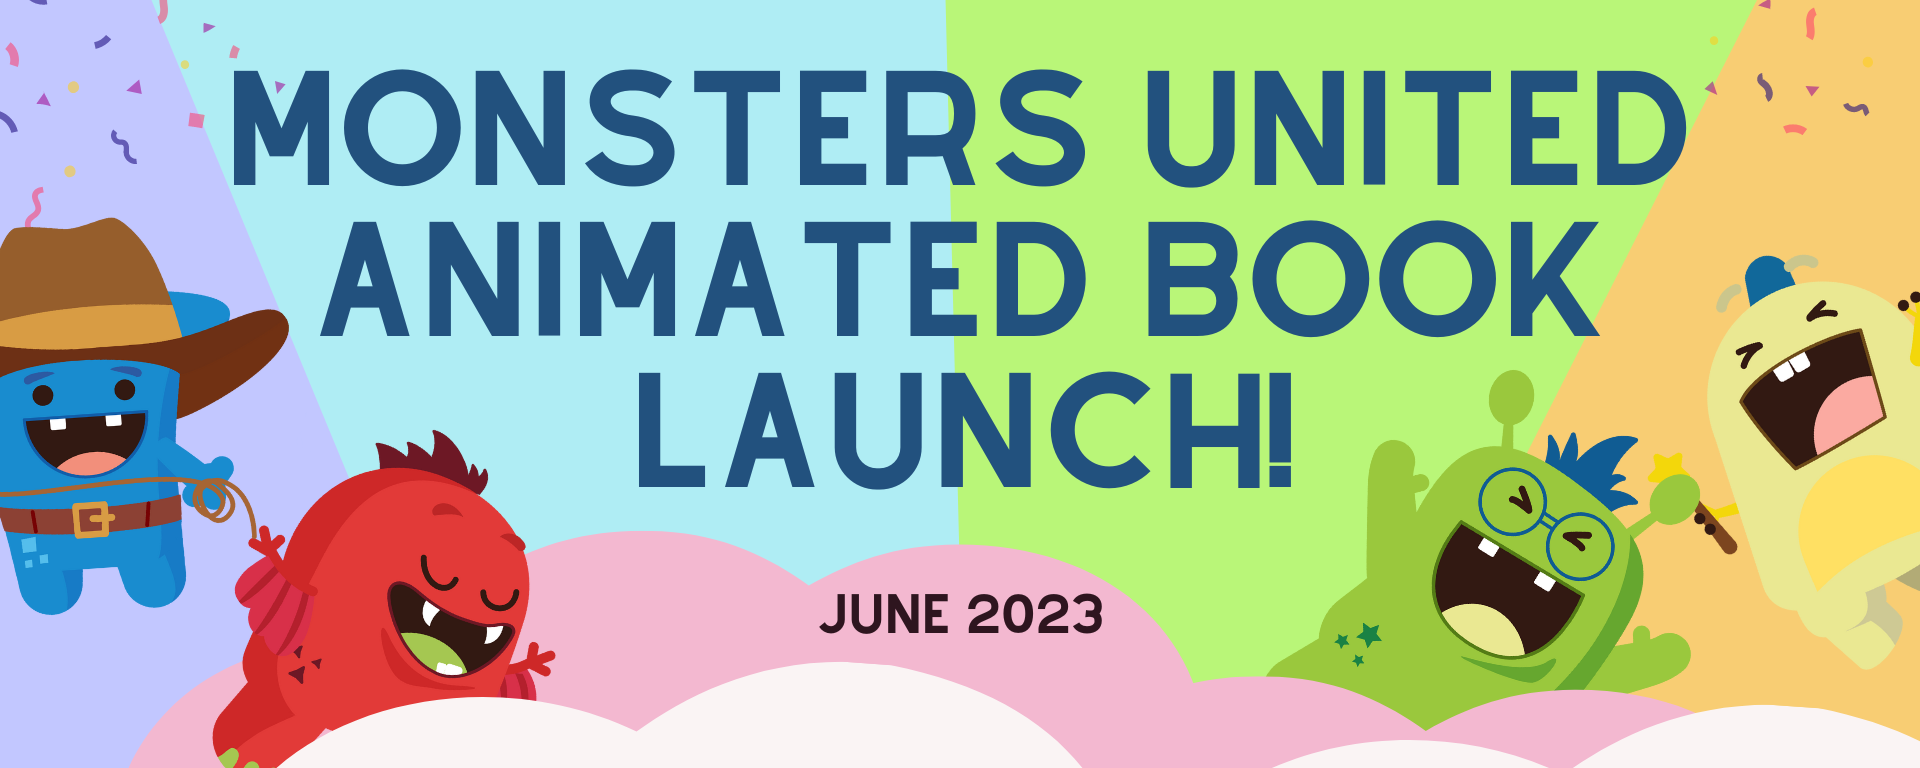 Monsters United Animated Book Launch image